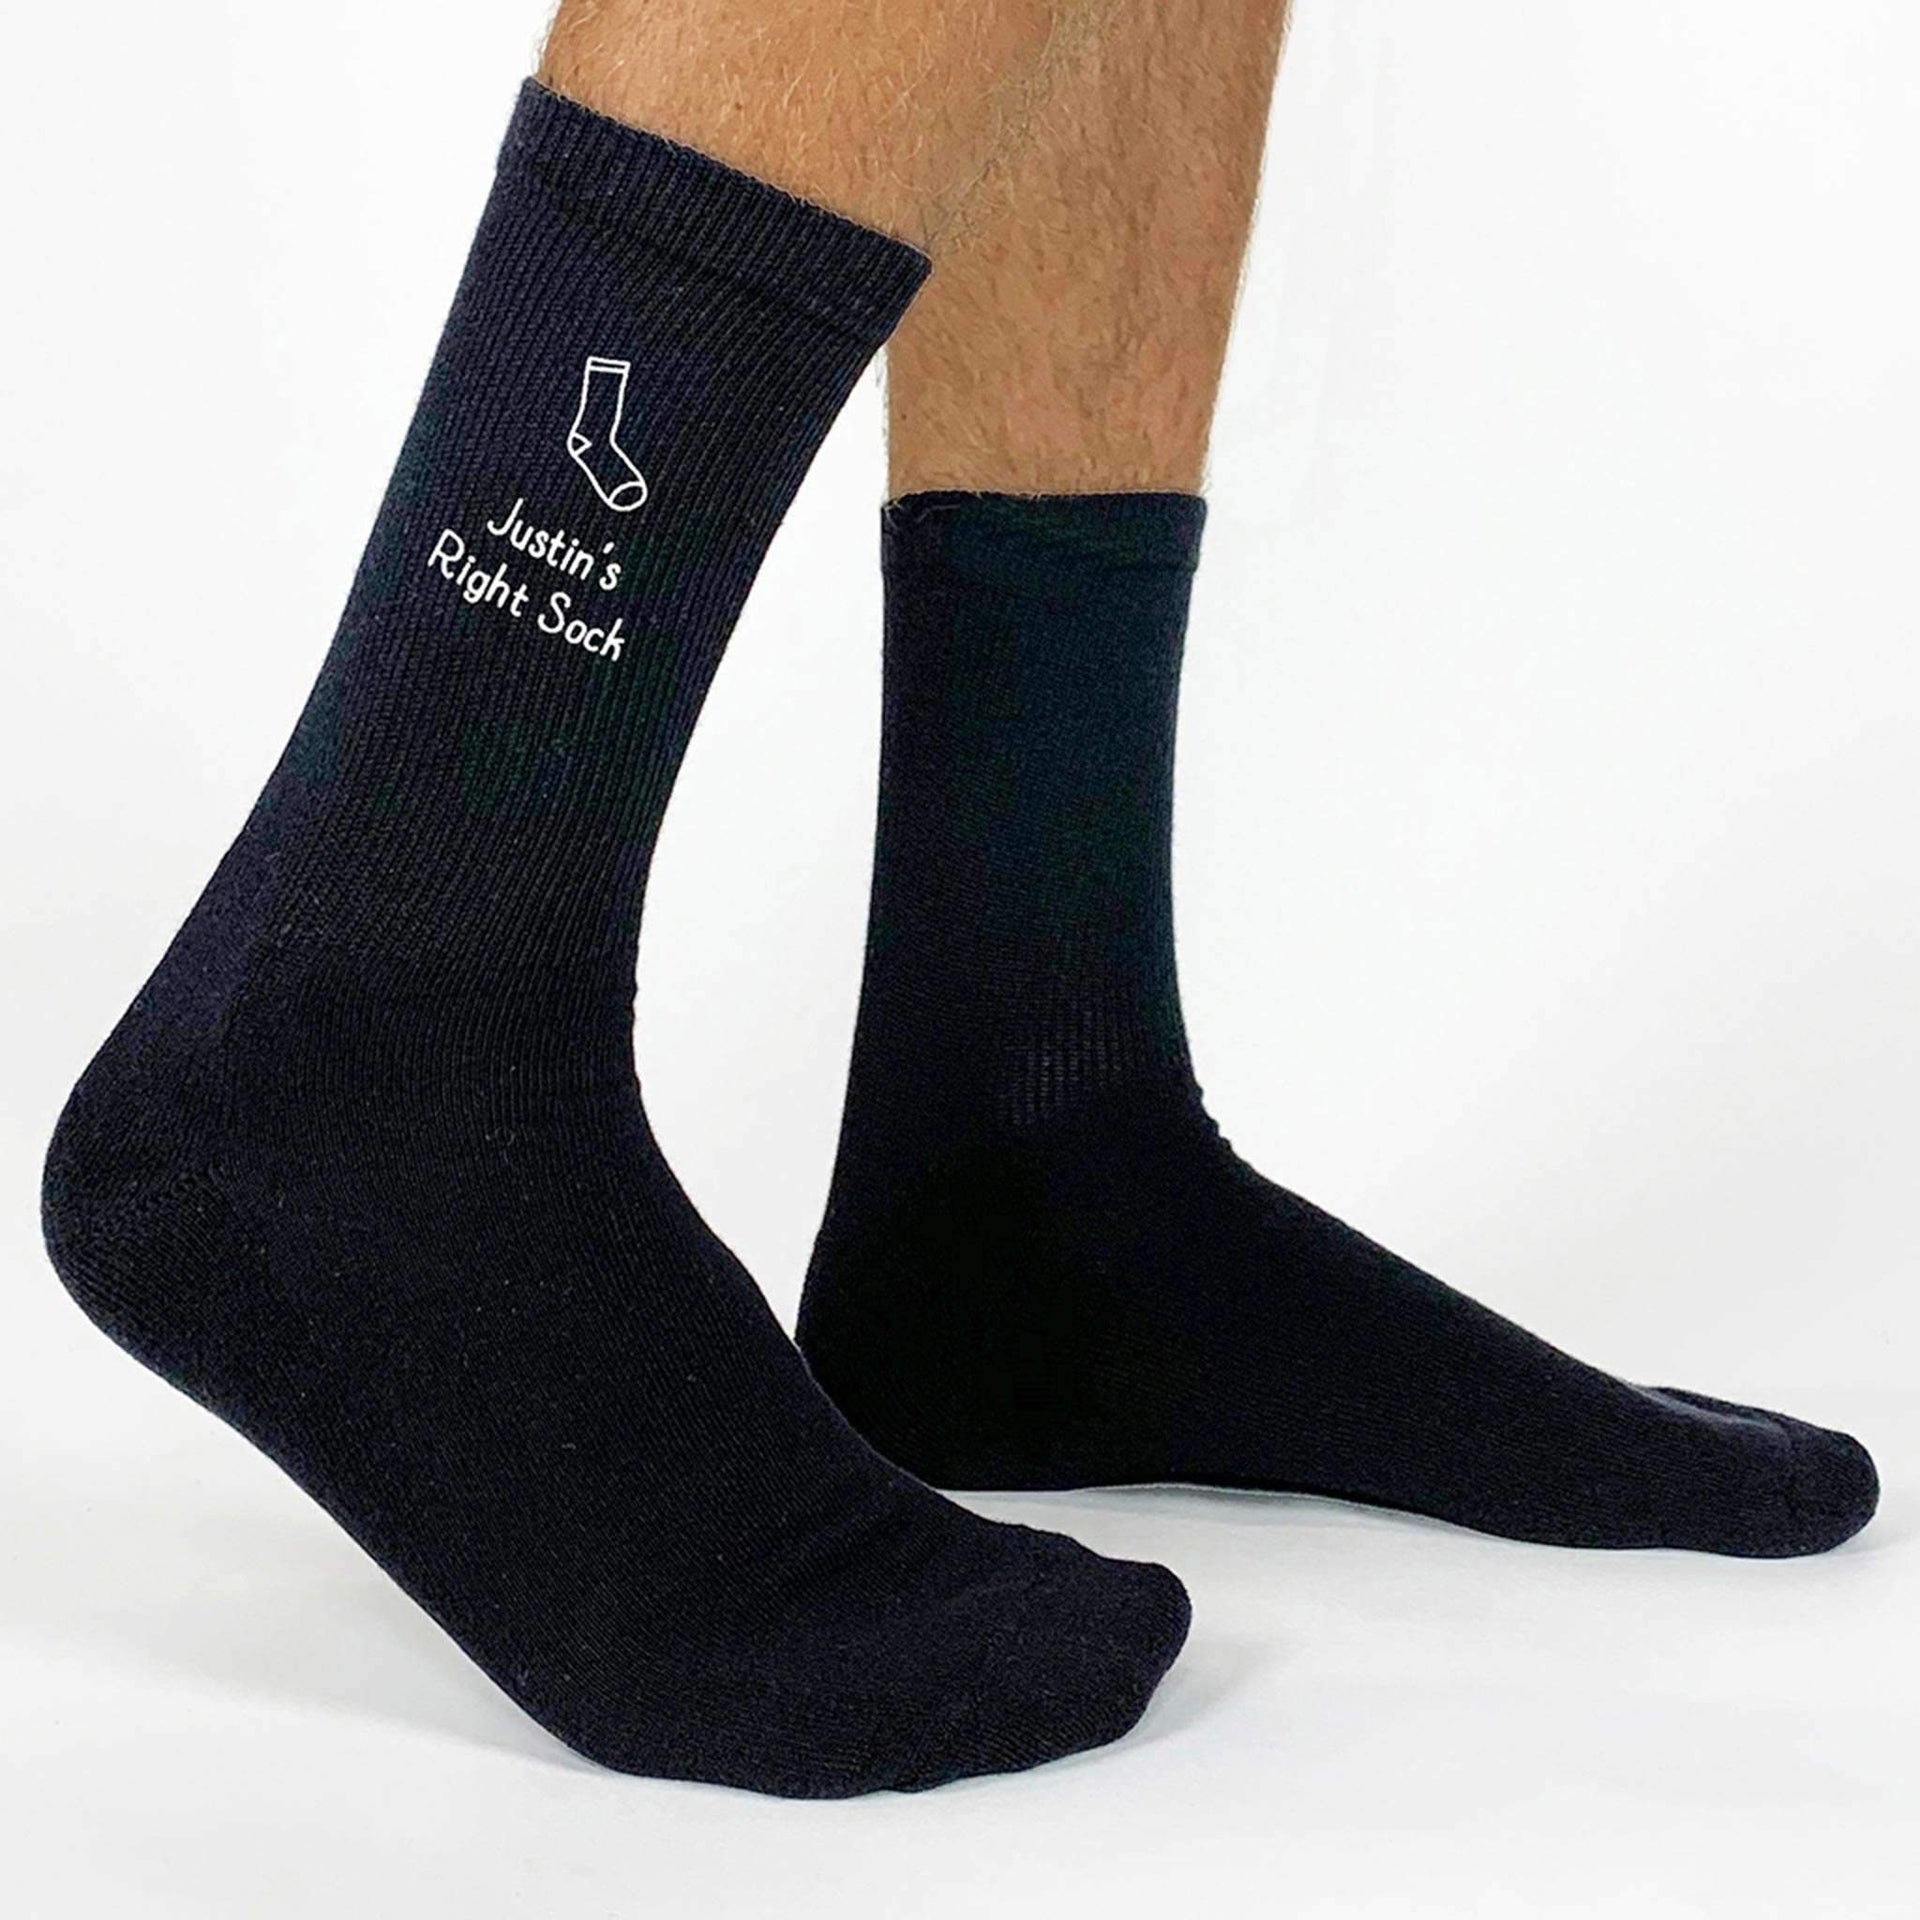 Funny personalized mens dress socks with a left and right design sold in a three pair gift box set.